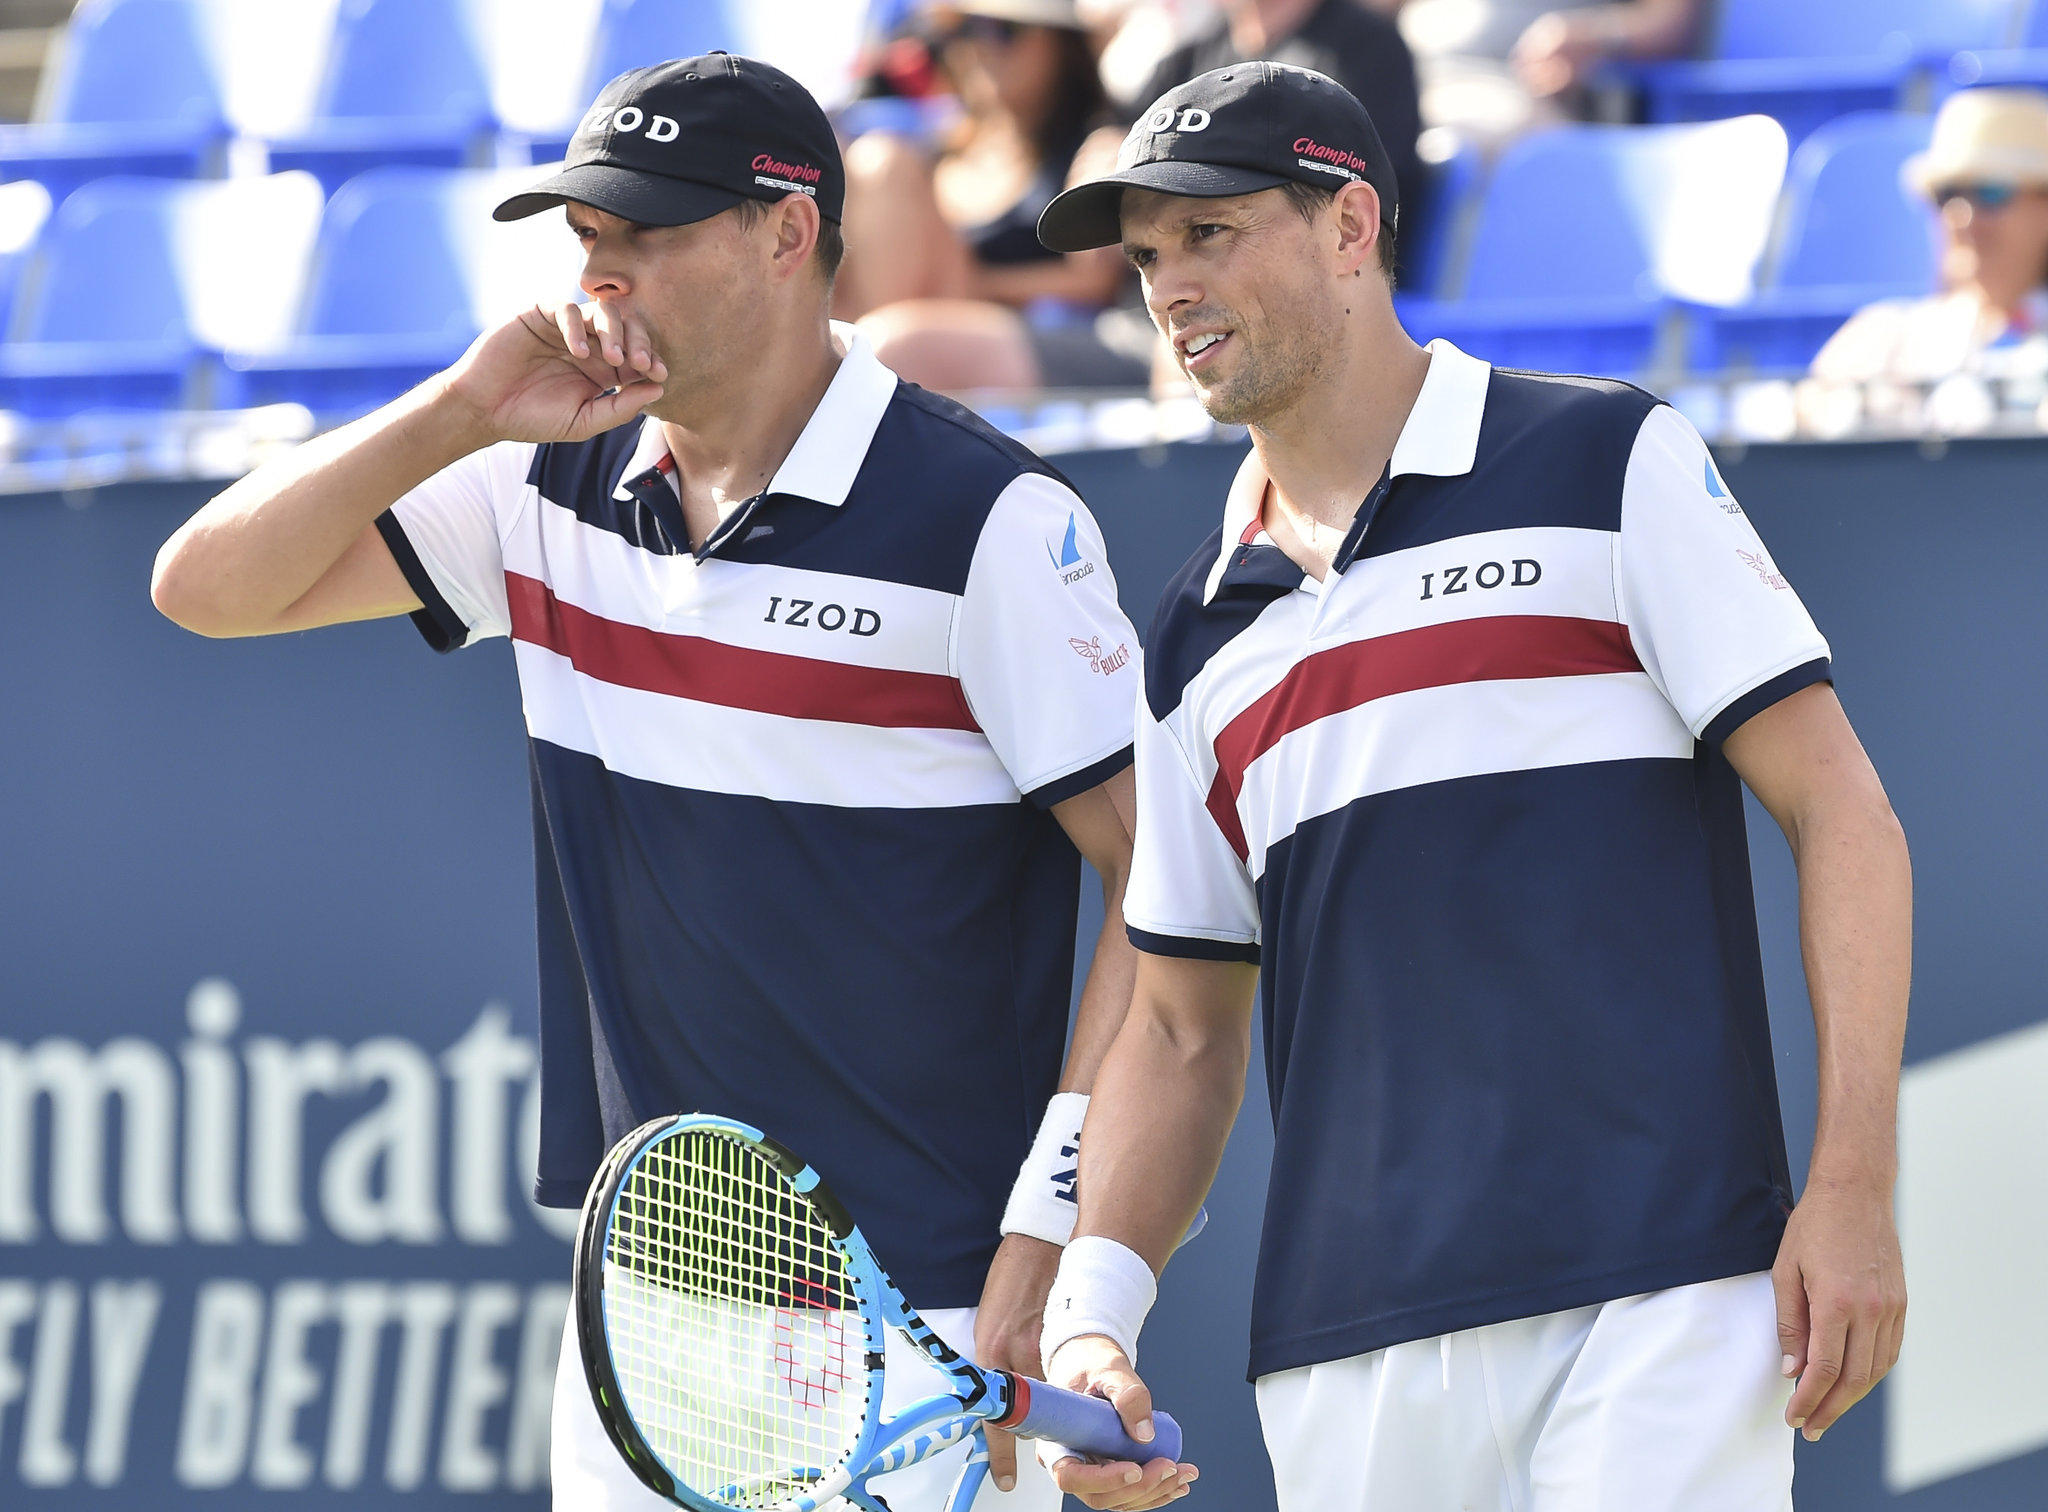 Bryan brothers announces retirement from the sport_40.1